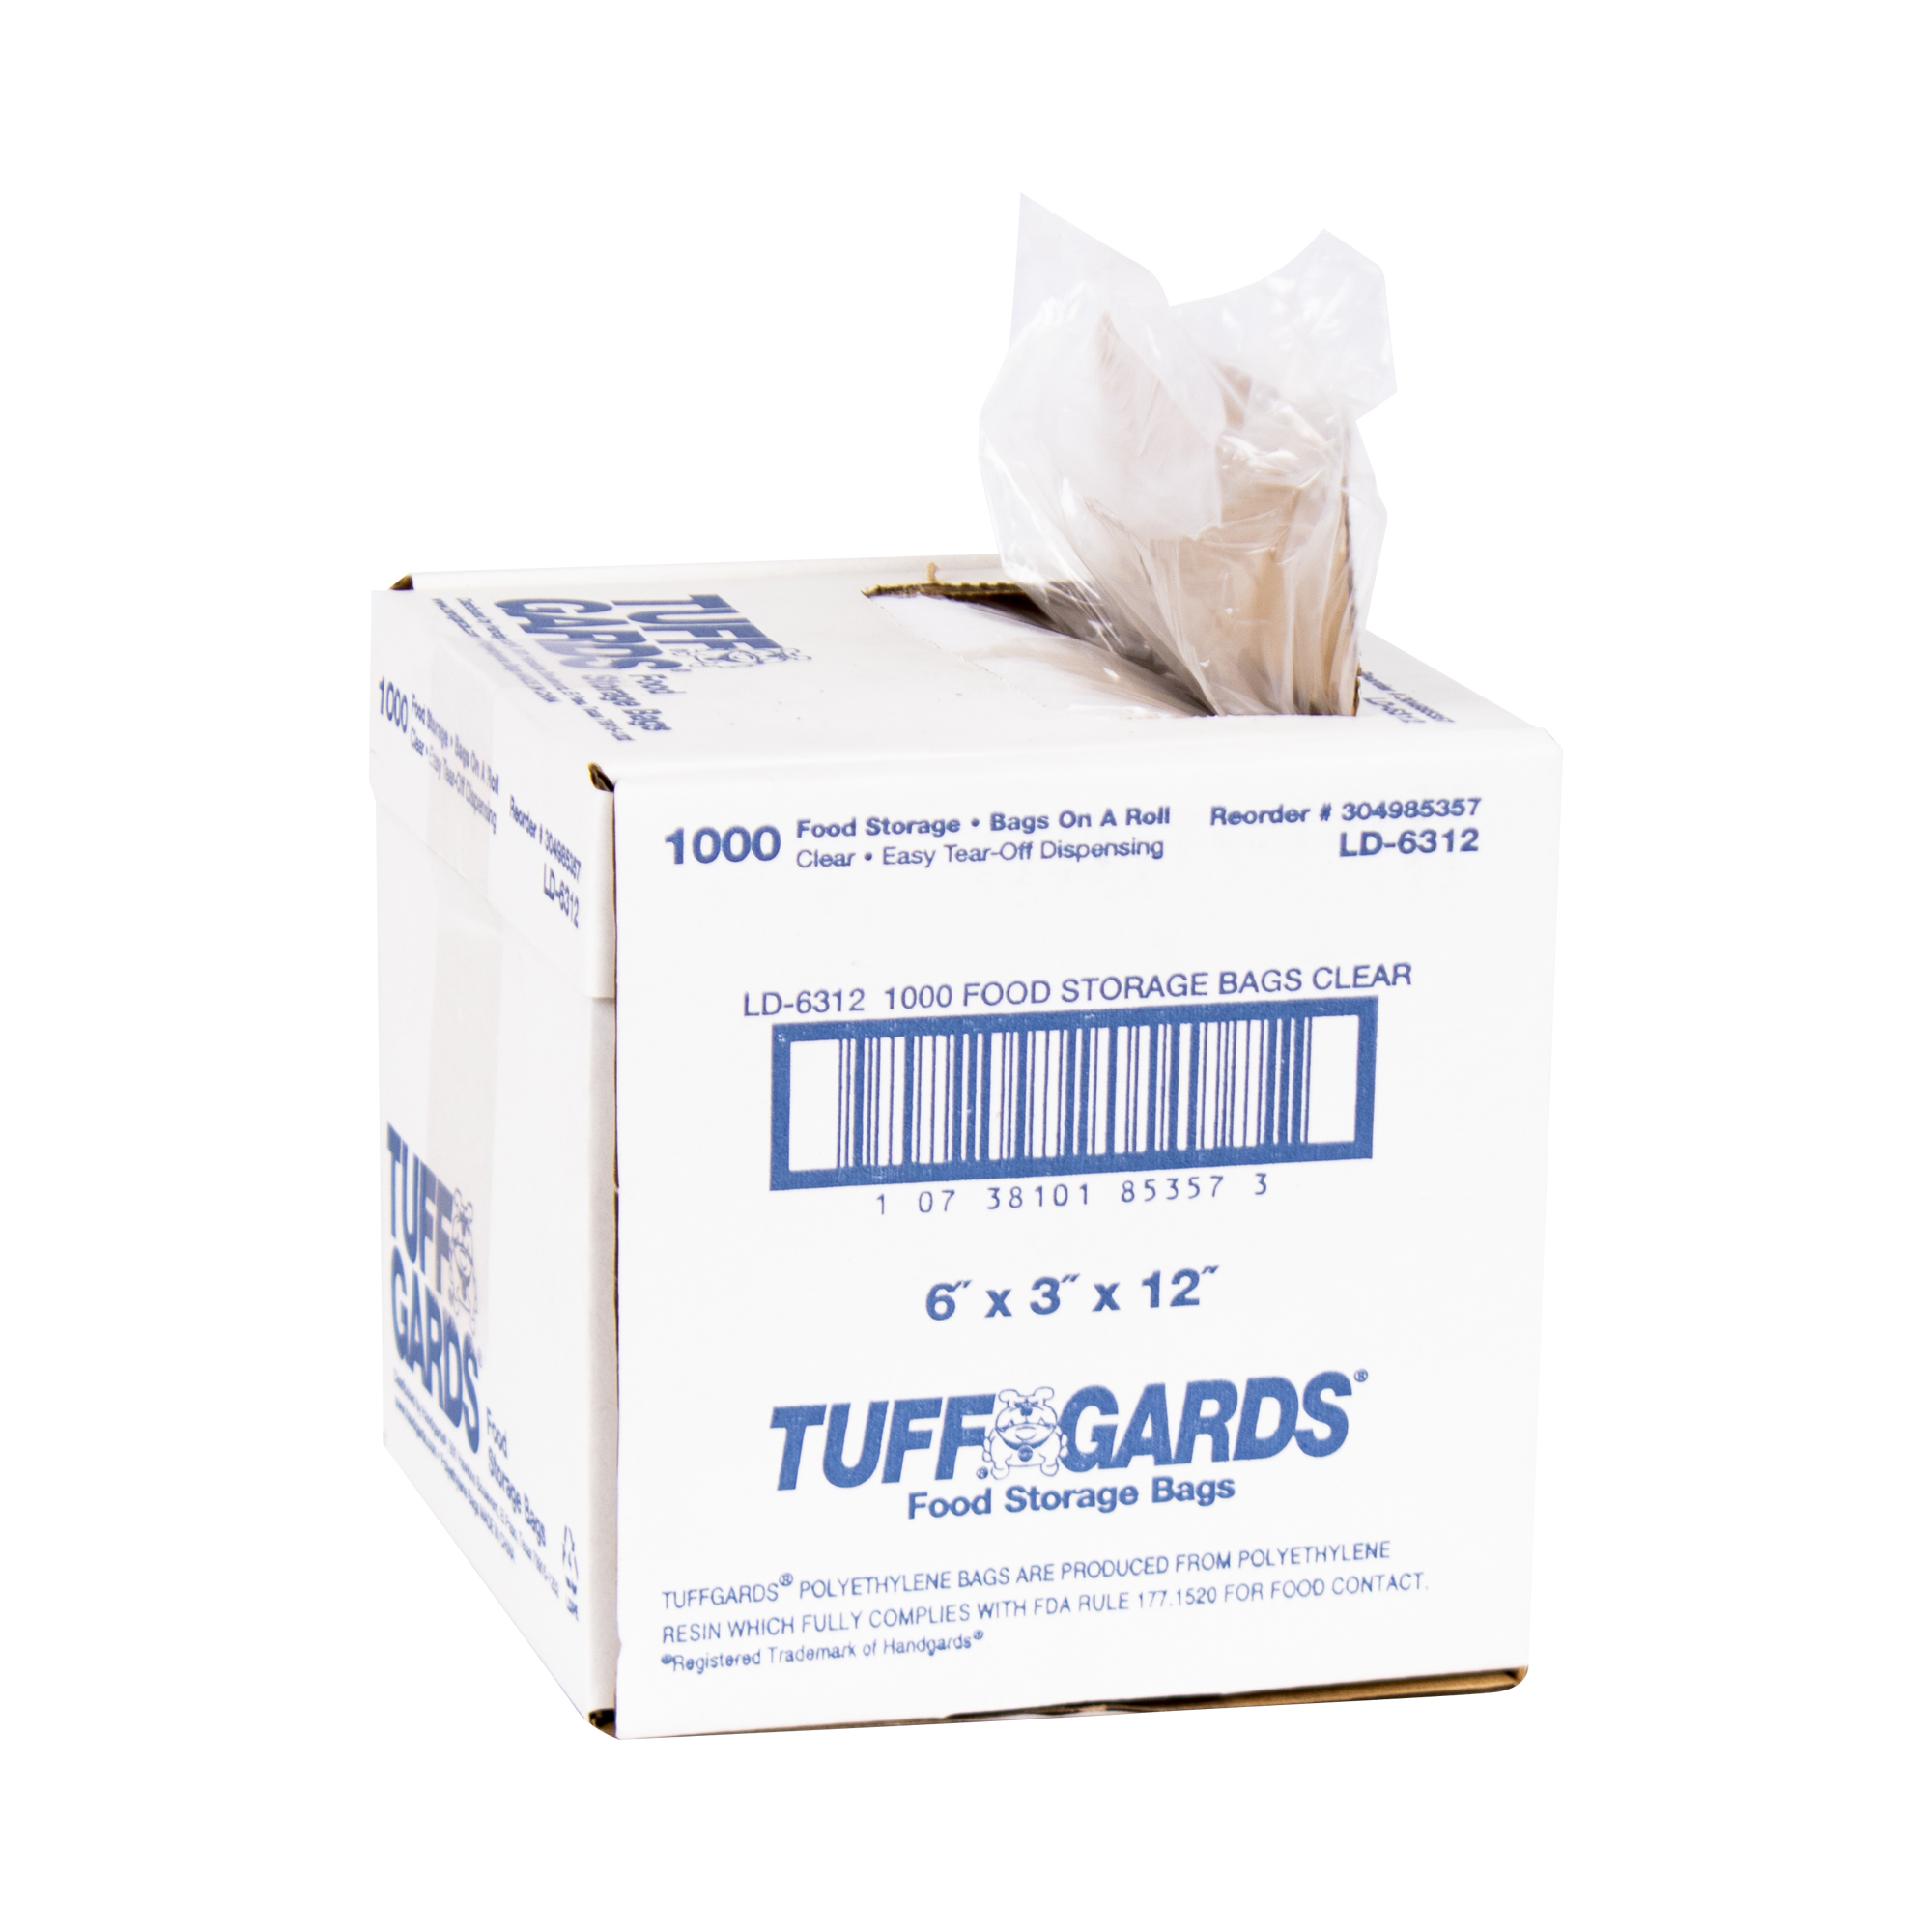 http://handgards.com/wp-content/uploads/2020/09/304985357-Tuffgards%C2%AE-Low-Density-Disposable-Food-Storage-Bags-%E2%80%93-LD6312-%E2%80%93-6%E2%80%B3-x-3%E2%80%B3-x-12%E2%80%B3-Open-Case.jpg